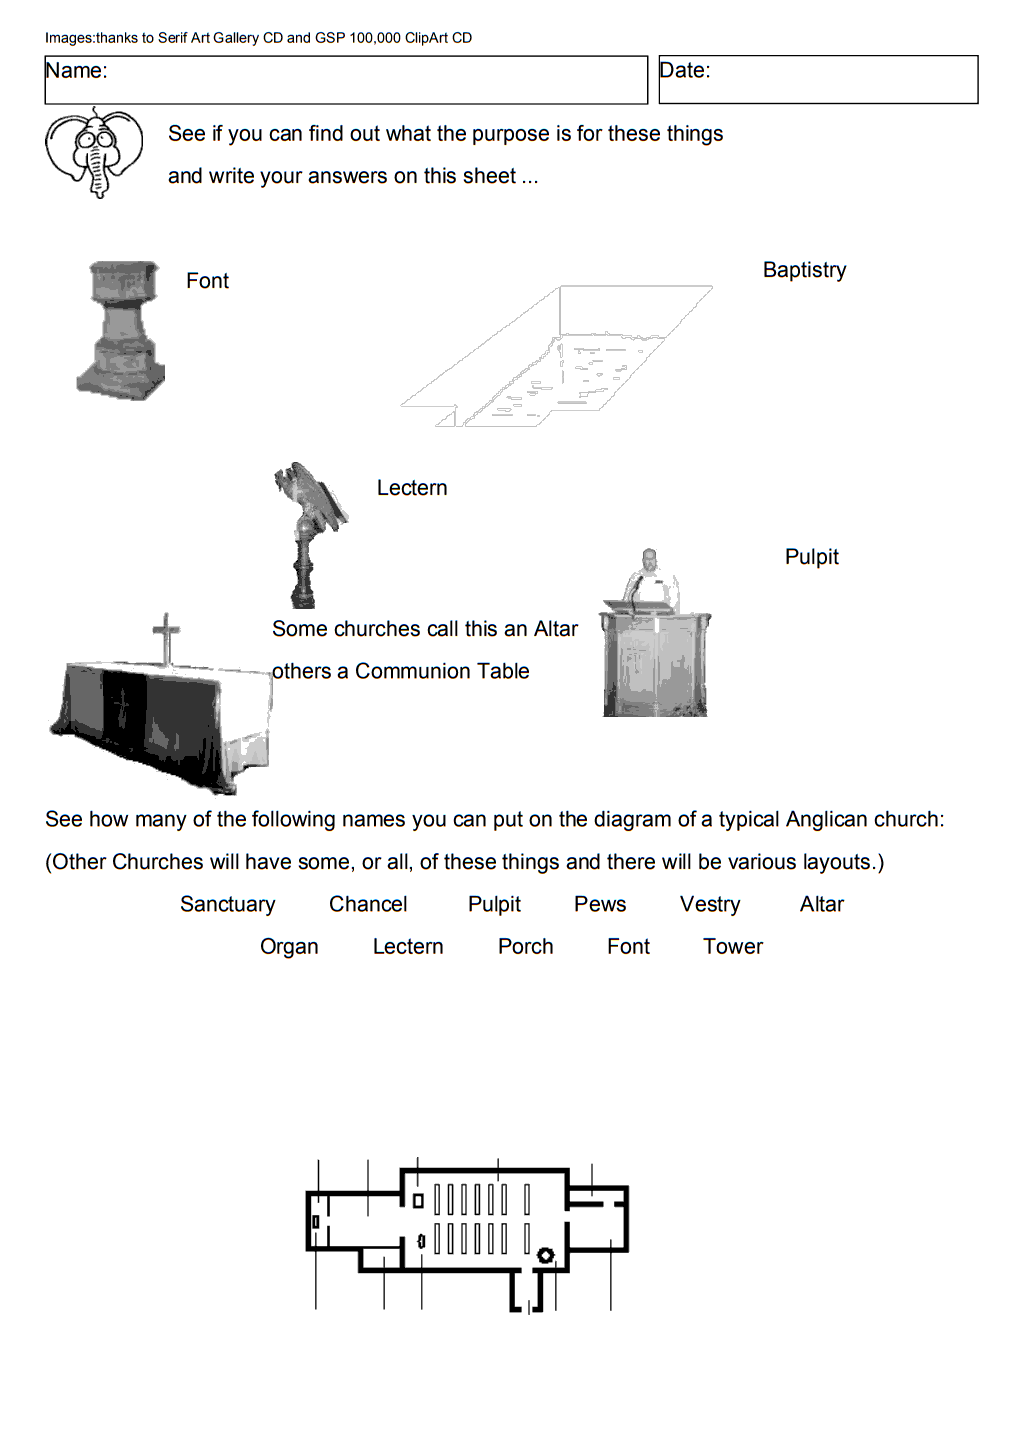 Items that might be found within a church